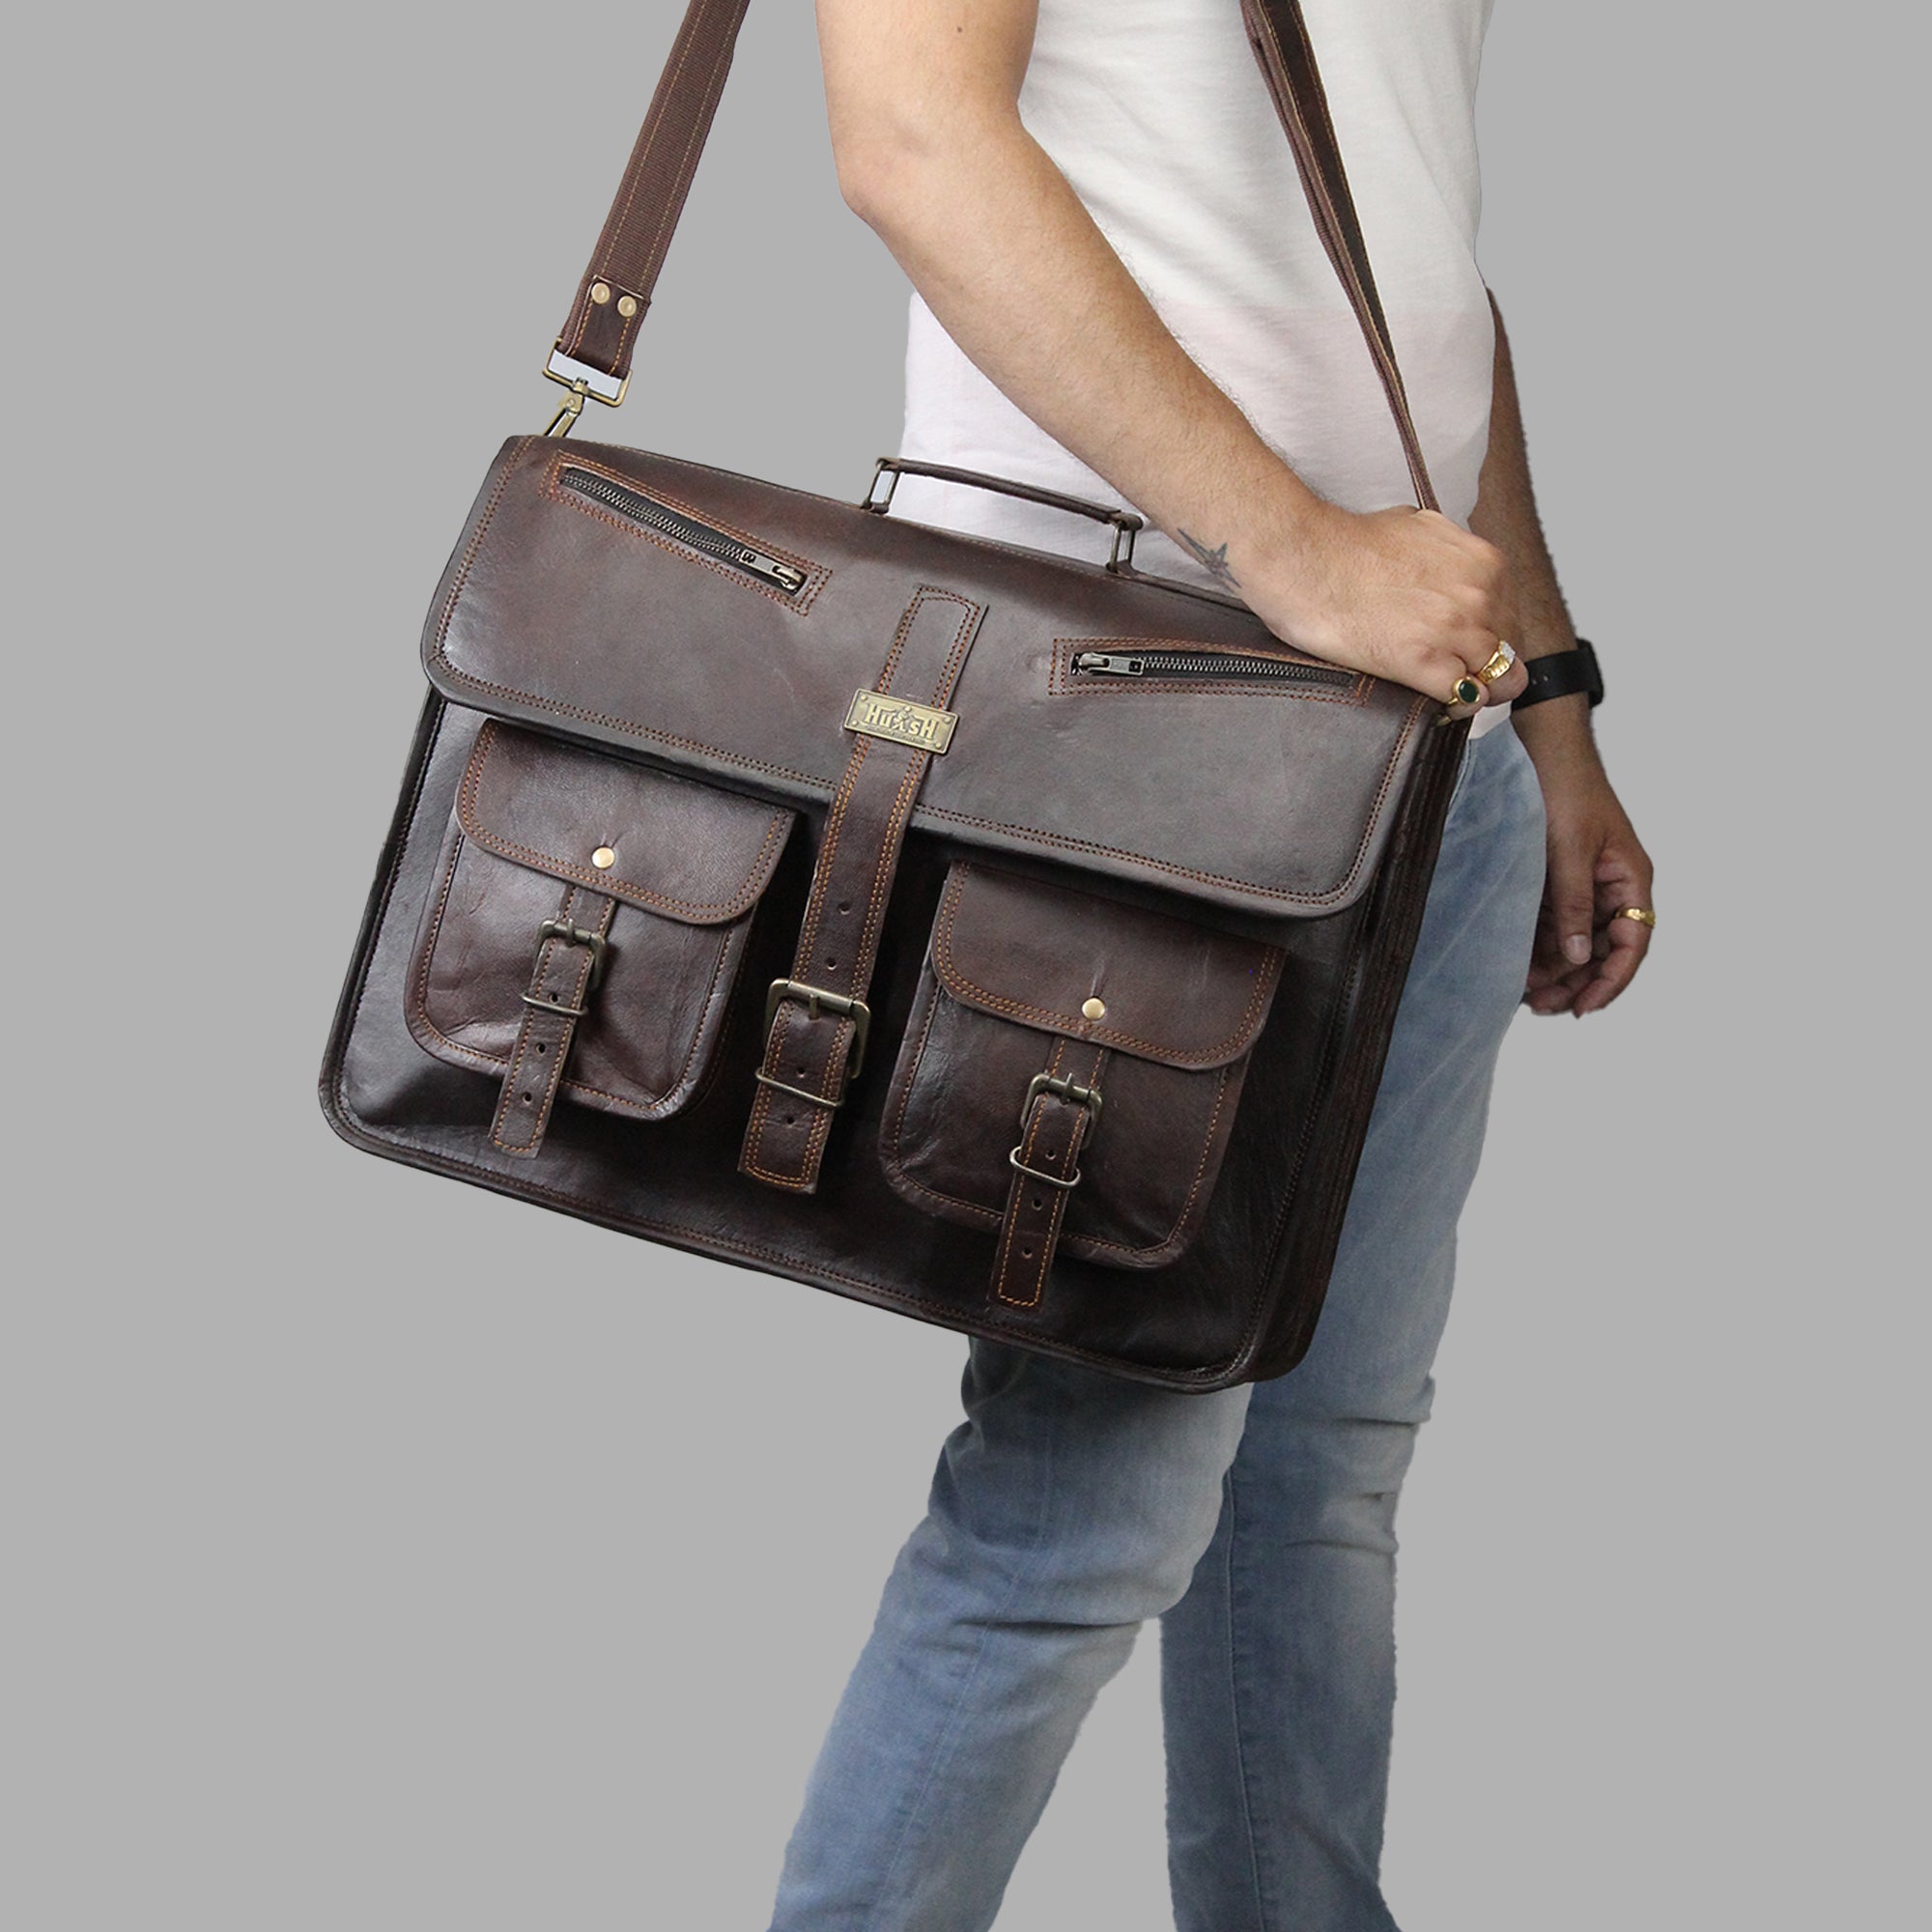 Hulsh Leather Bags | Leather Bags for Men and Women